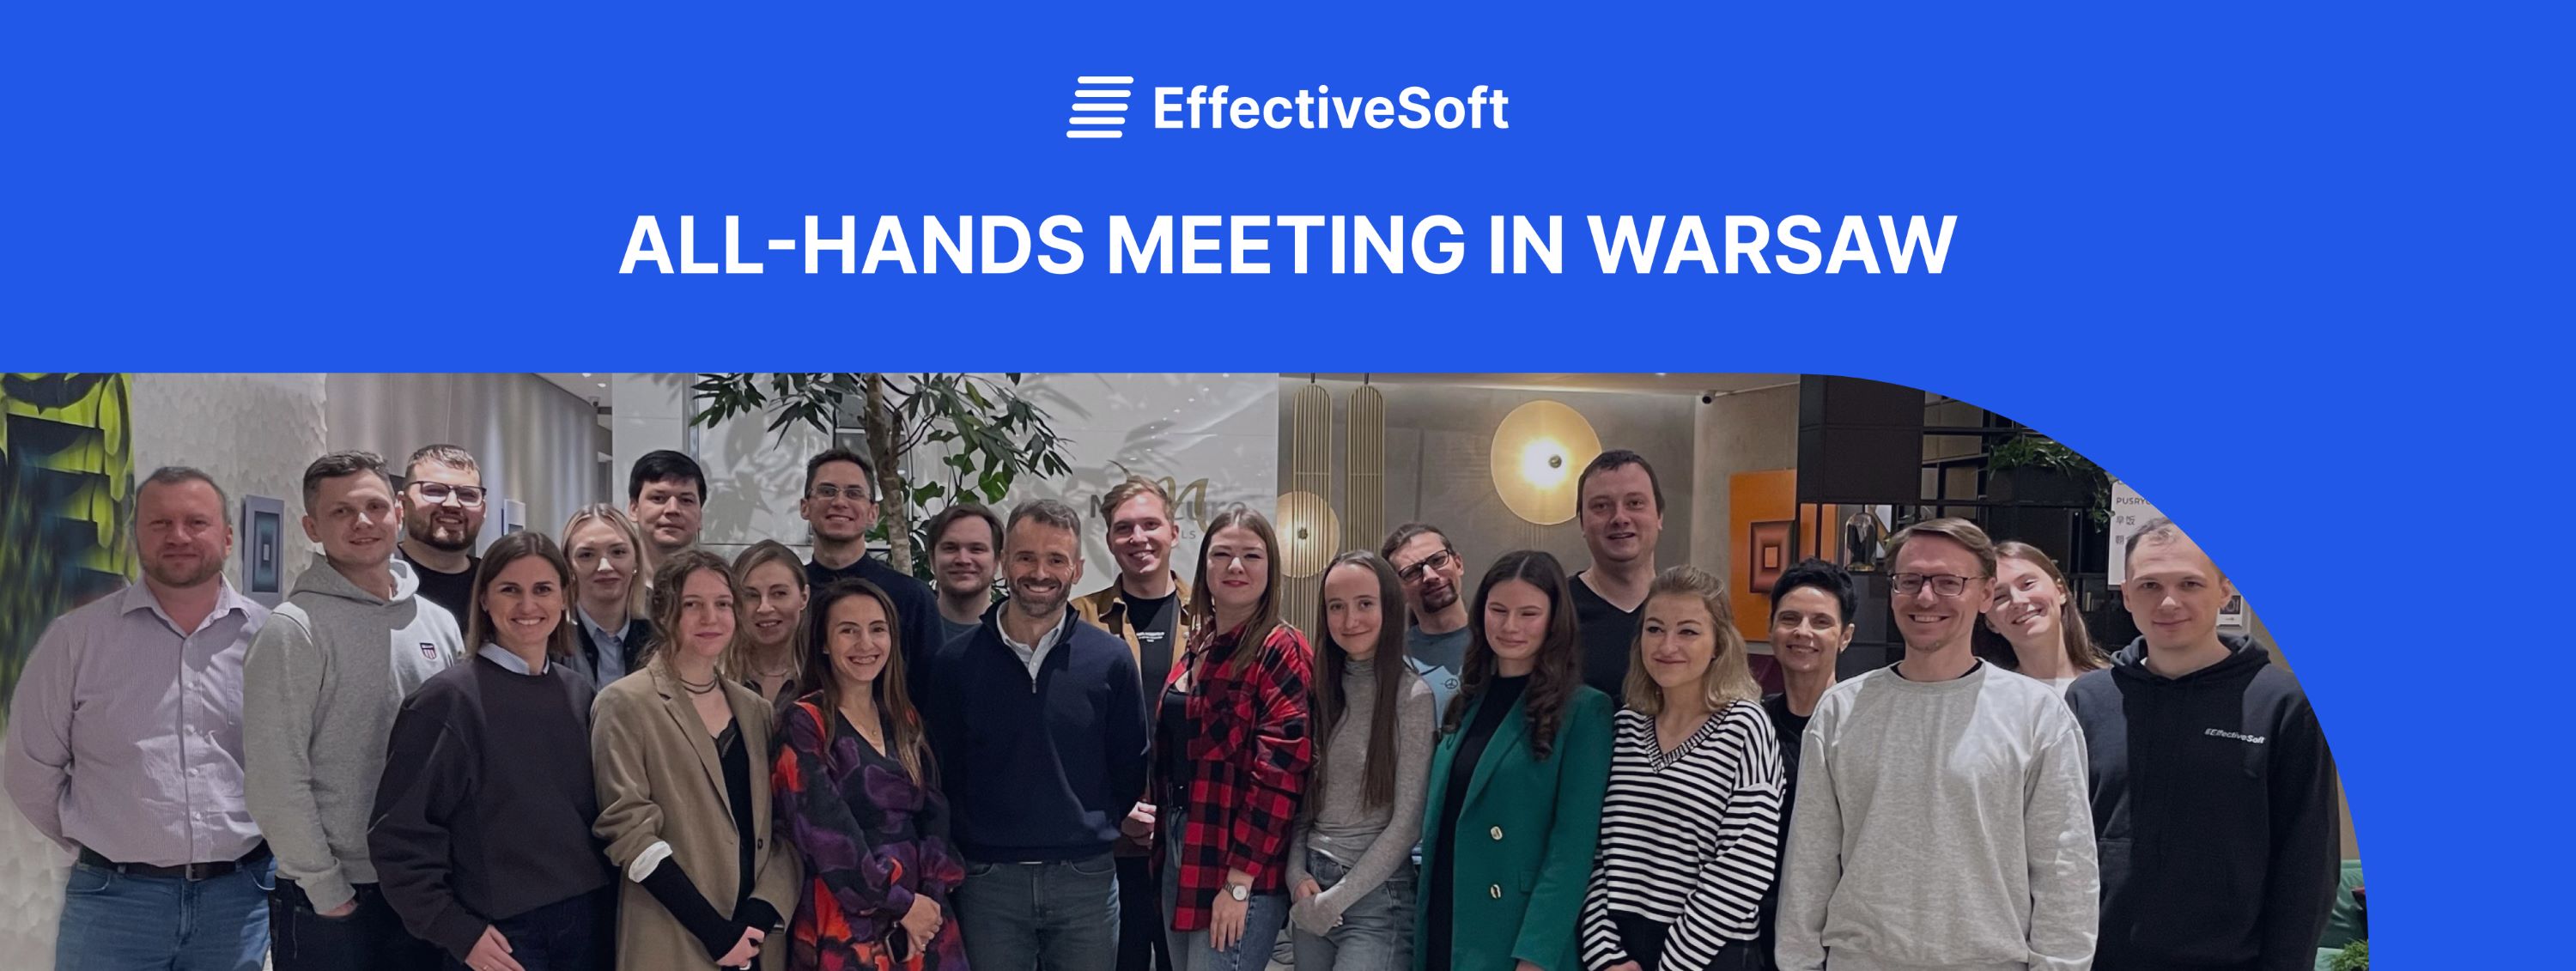 Effectivesoft All-hands meeting in Warsaw